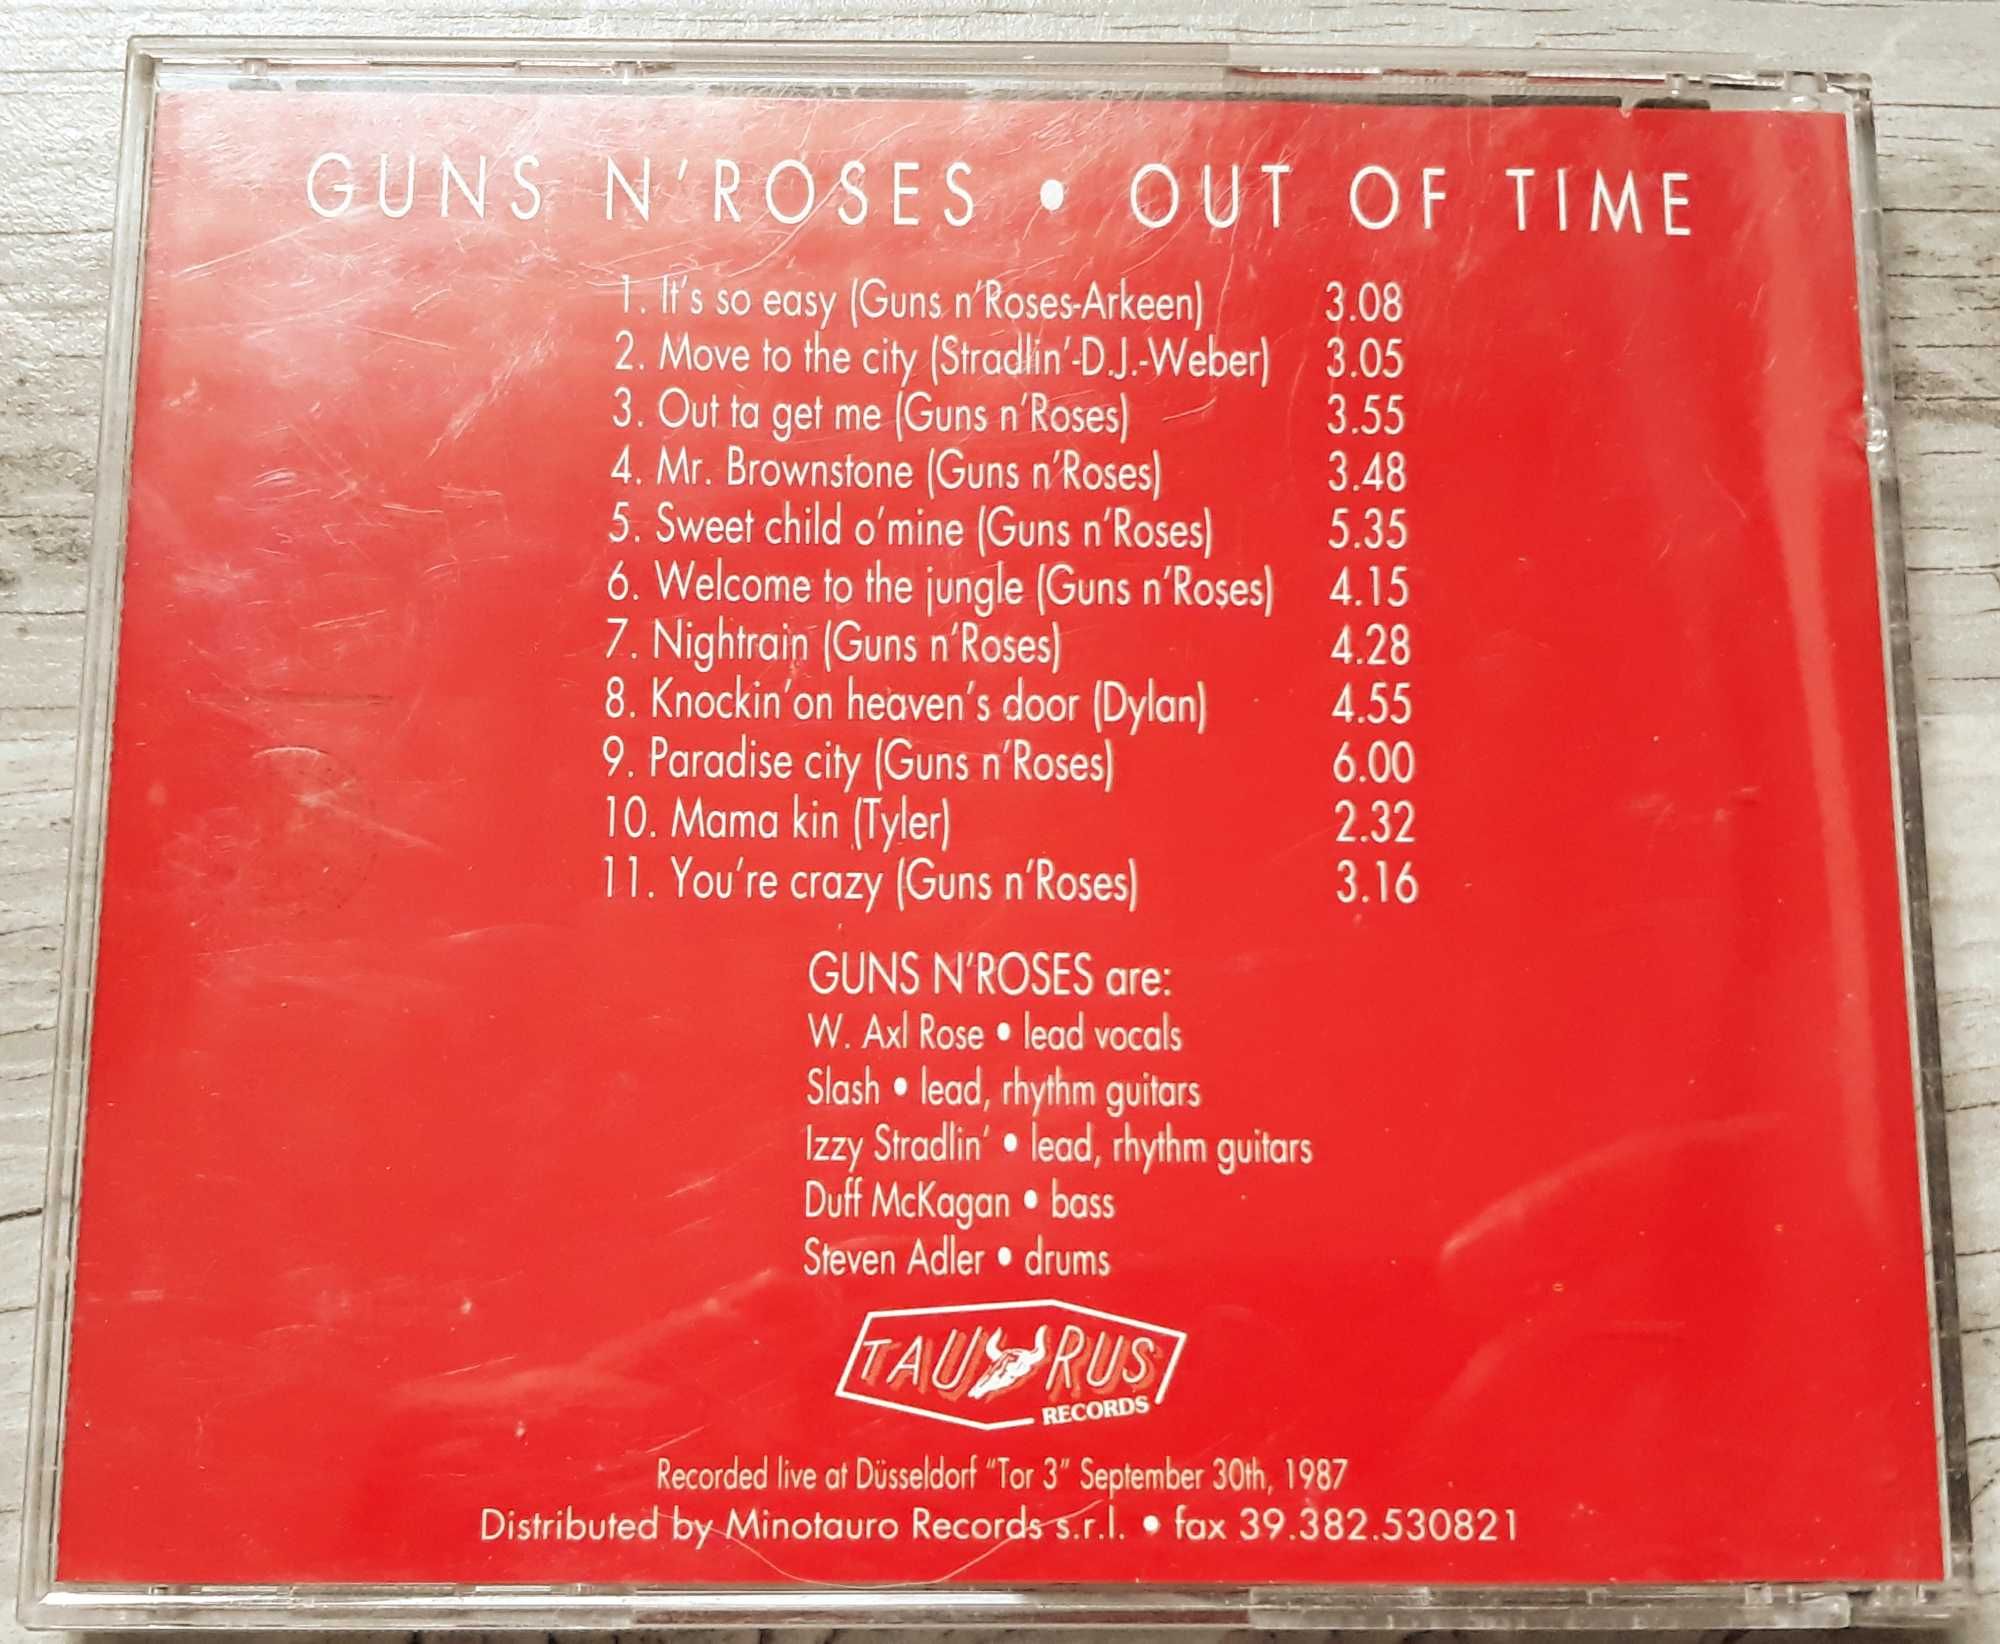 Guns n roses - Out of time (CD)